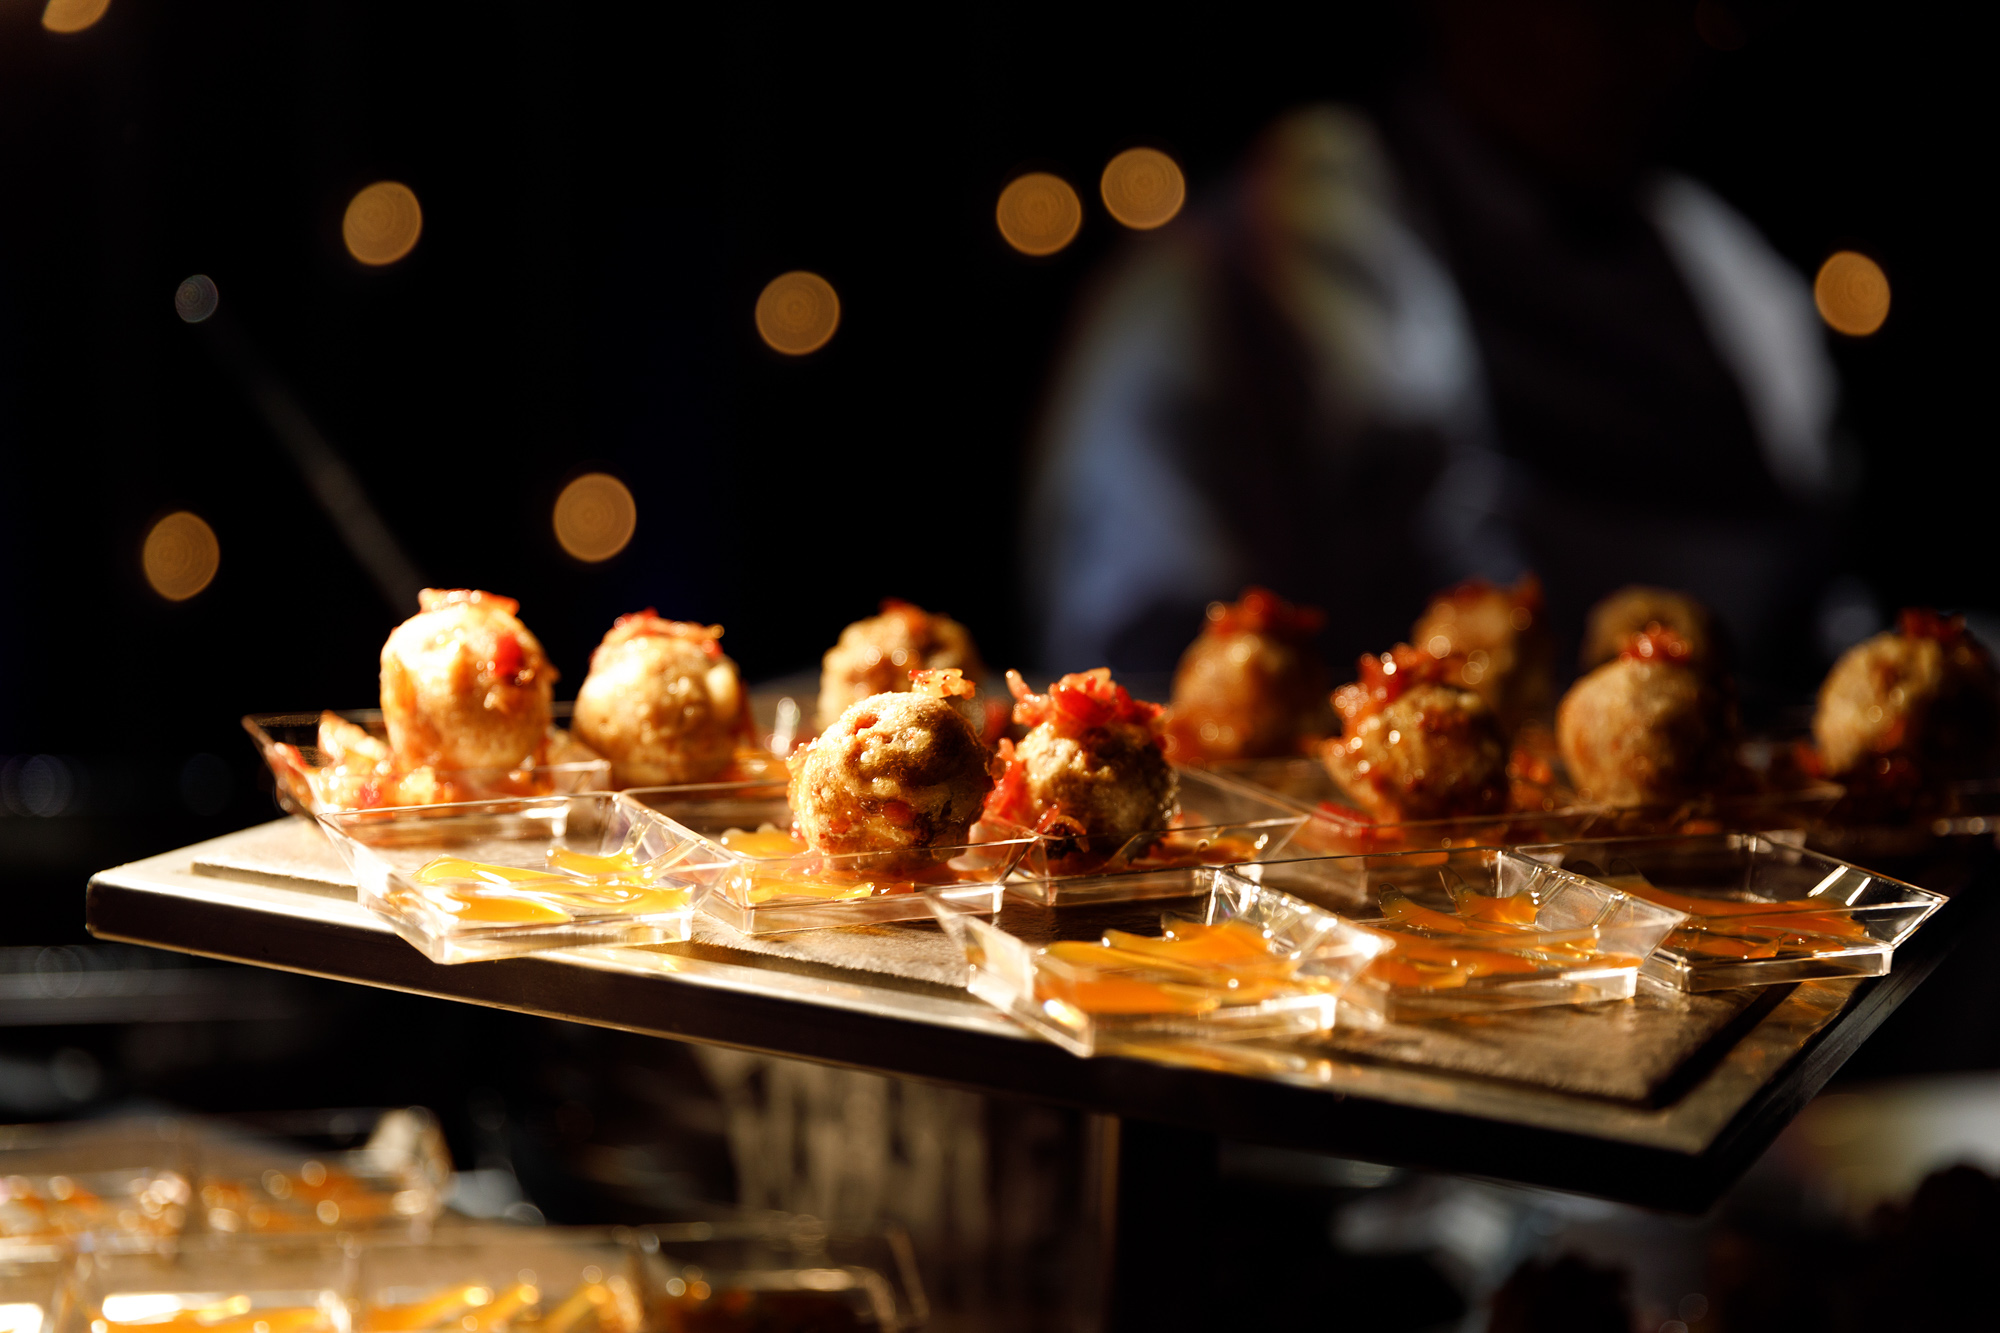 Appetizer, an option for food service for your event